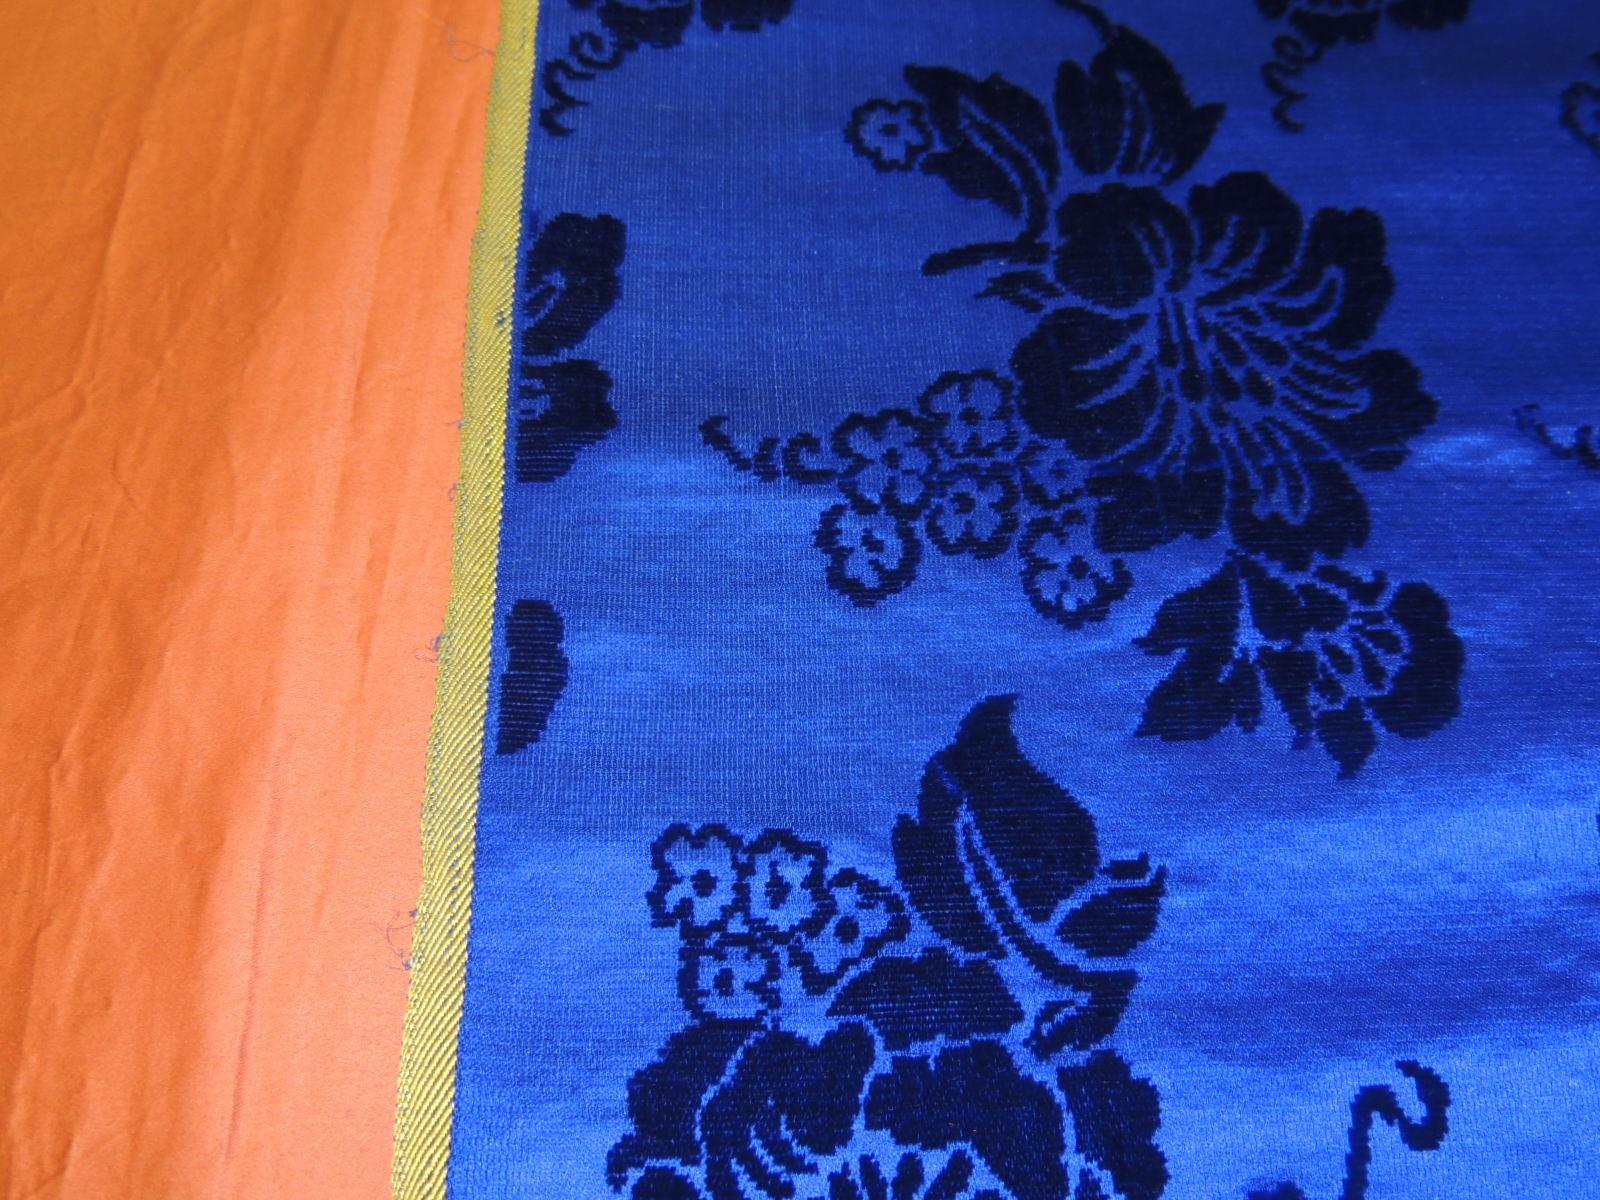 Vintage Royal blue satin and silk cut velvet Asian textile.
Ideal for upholstery, pillows, curtains or shades.
Measures: Width 29